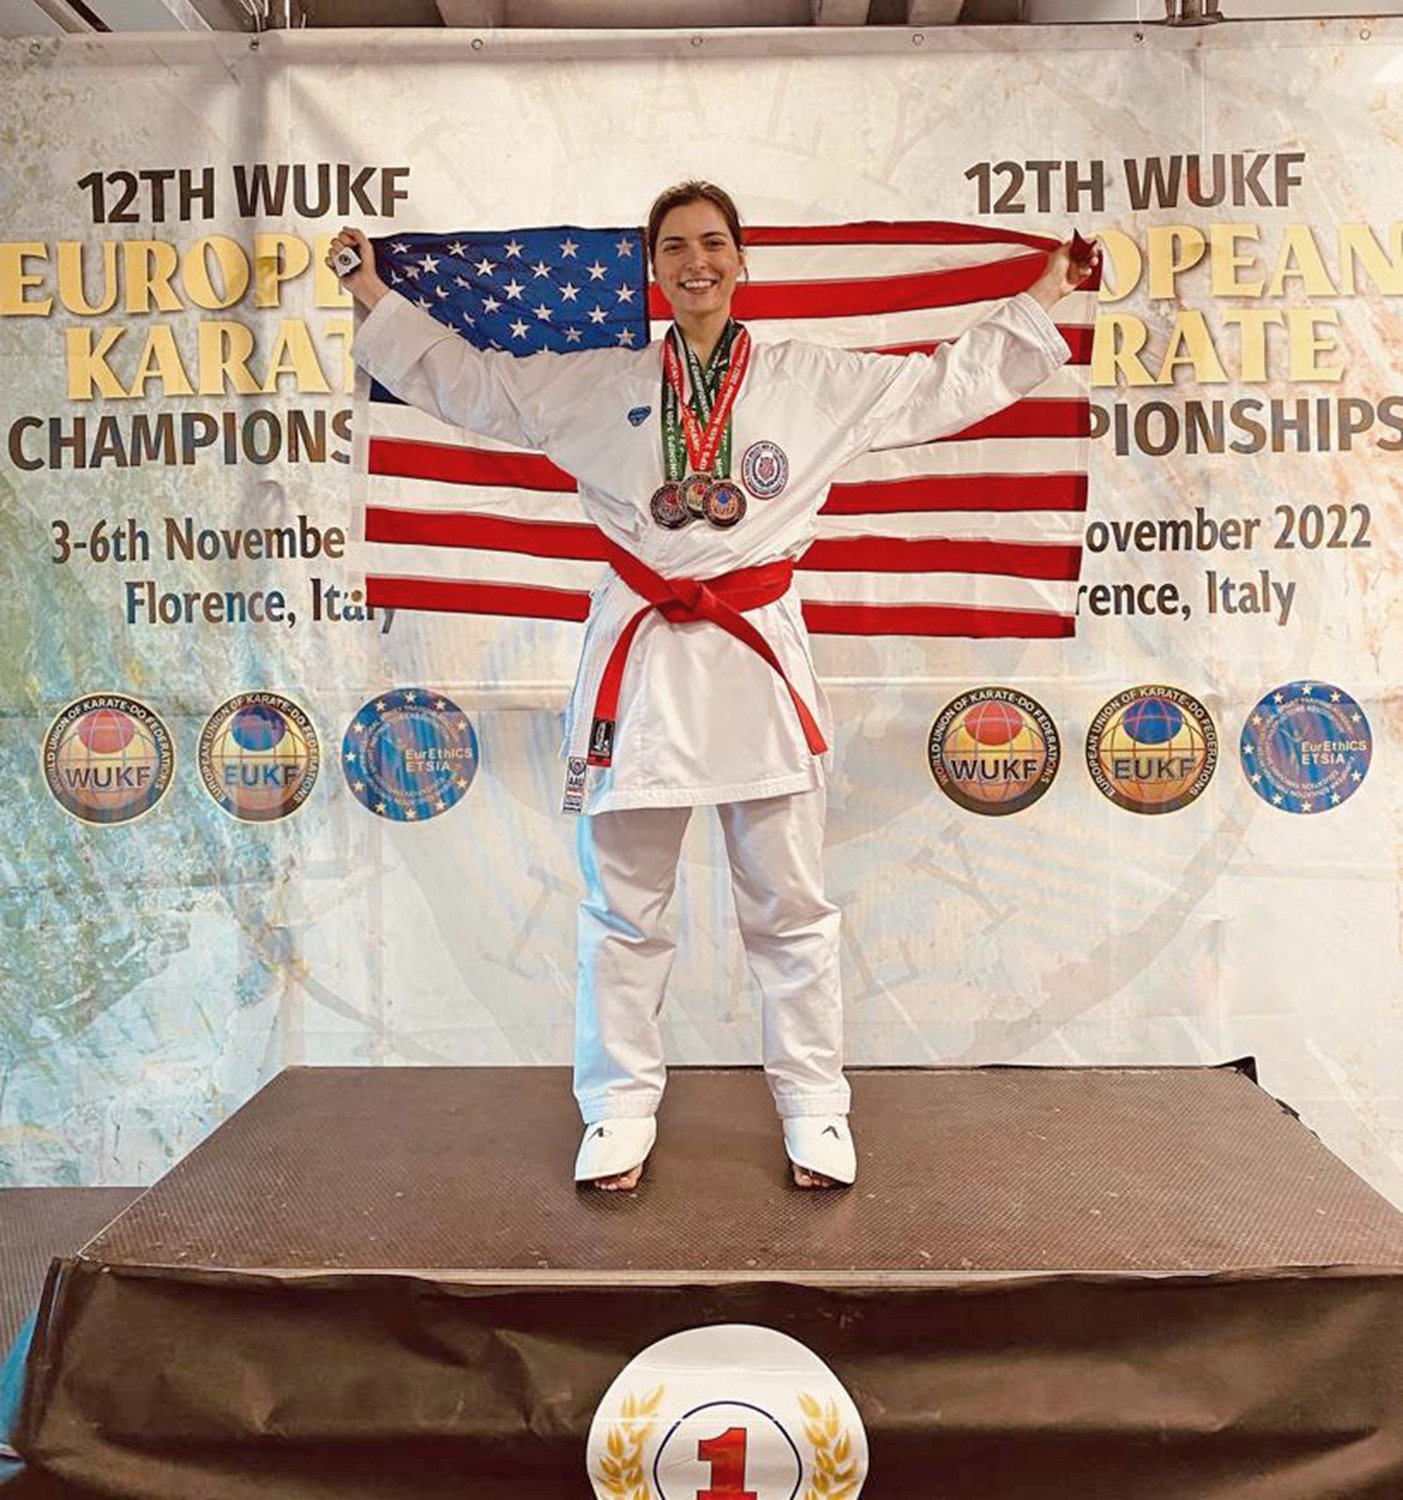 Utica’s Tea Sijaric won several medals while competing with Team USA at the World Union of Karate-Do Federations European Championships in Italy in November 2022.